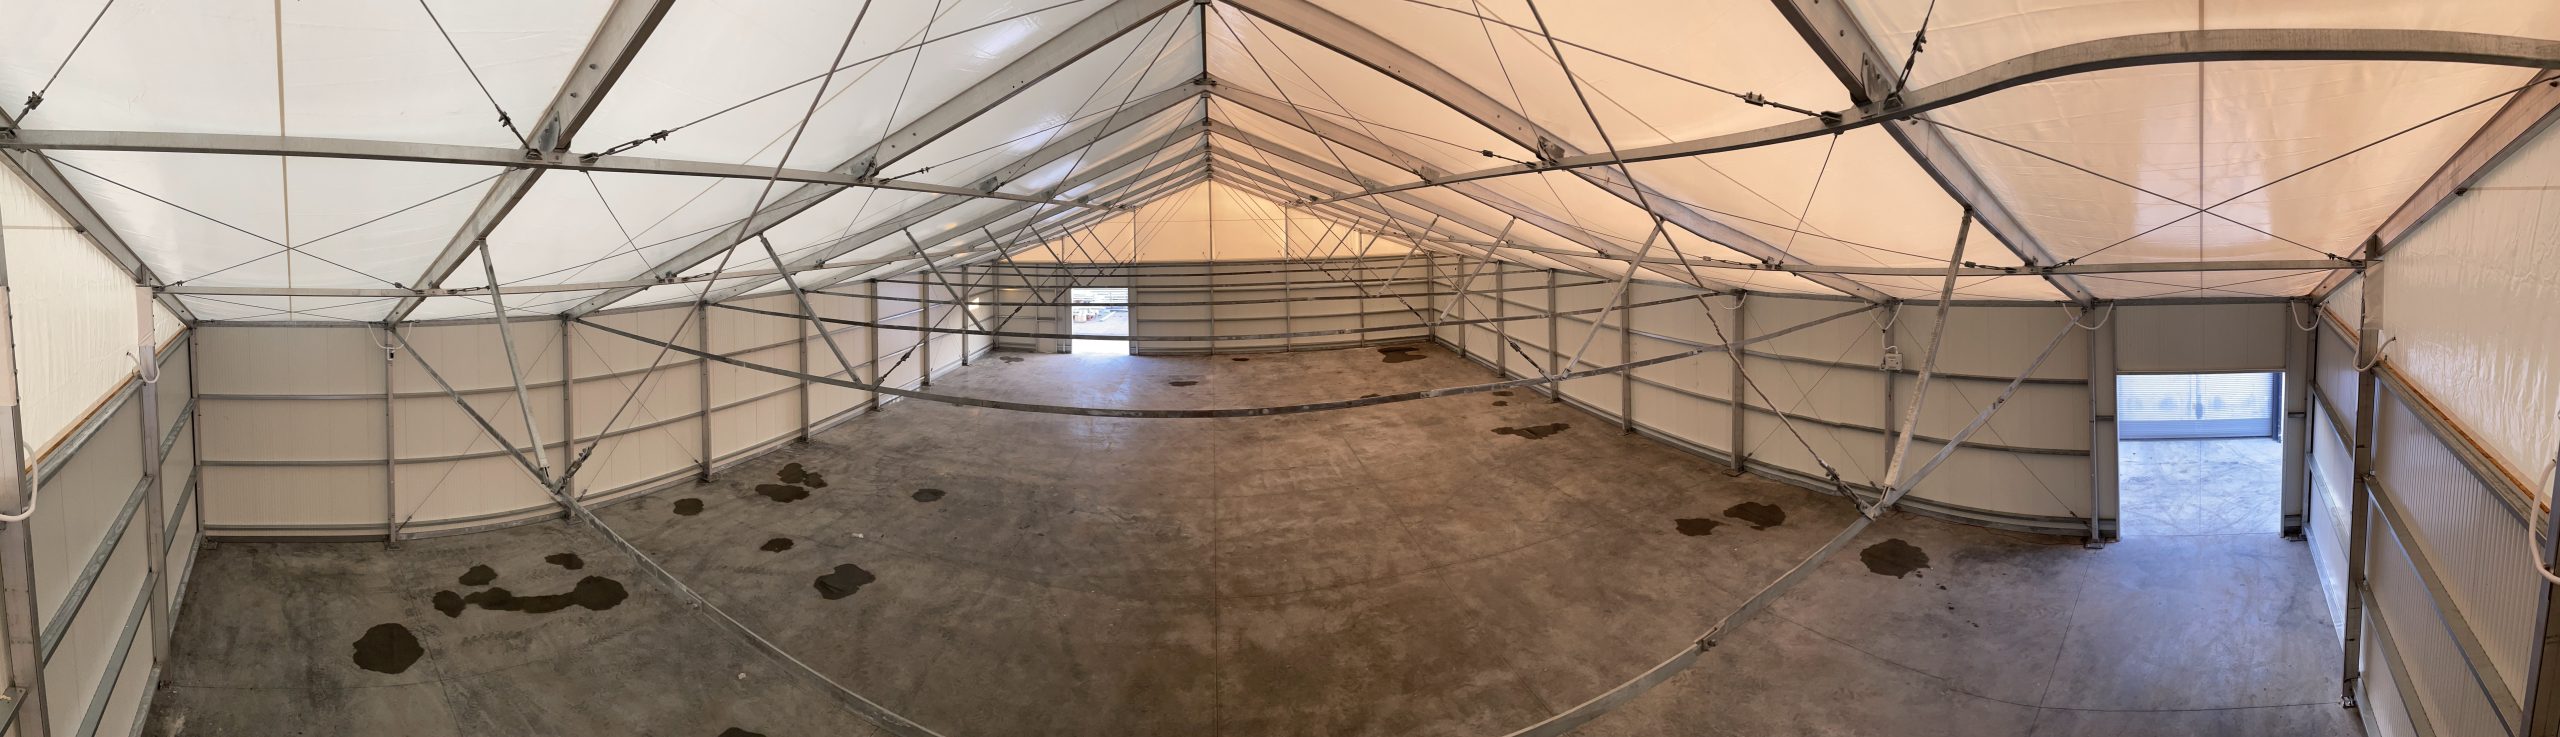 Temperature Controlled Storage Tents for Construction